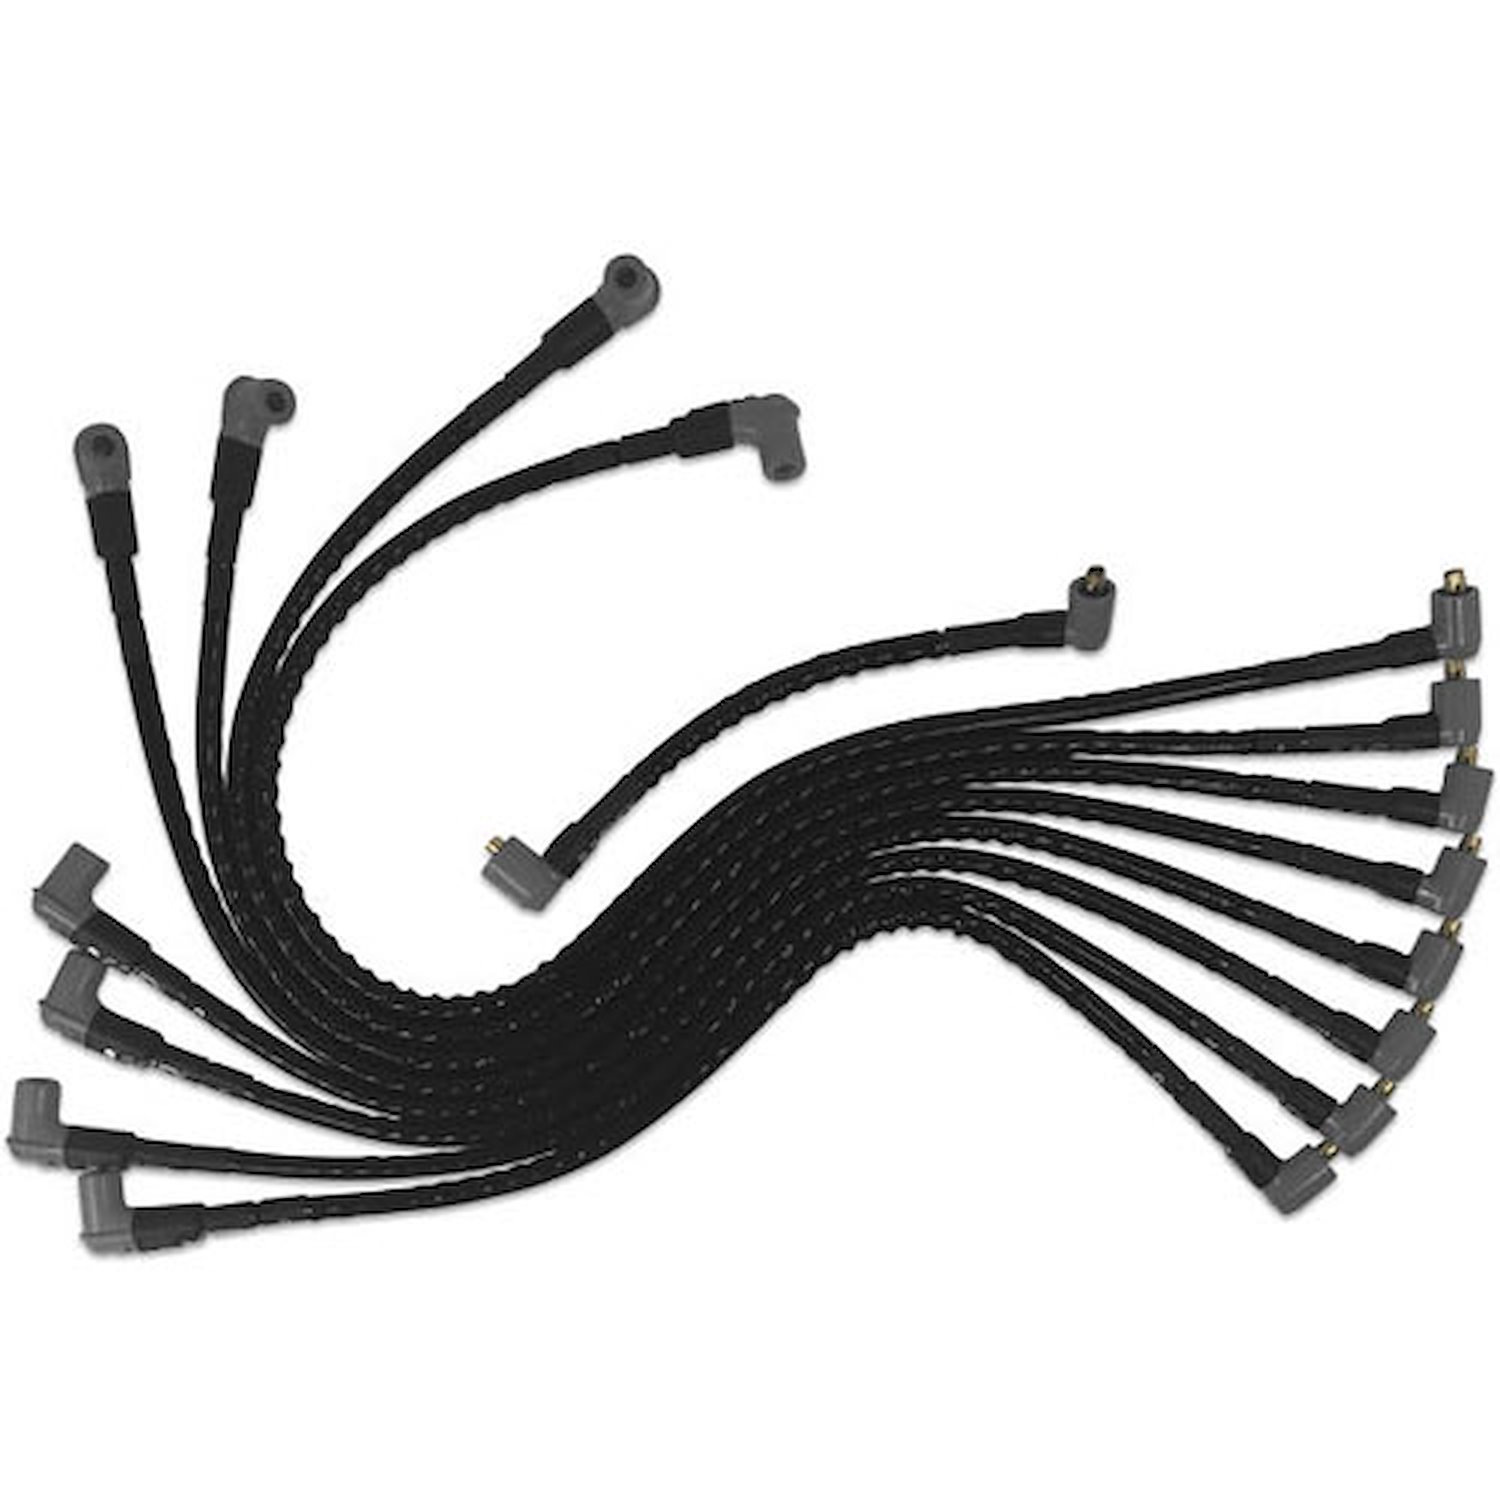 Super Conductor 8.5mm Sleeved Wire Set Black